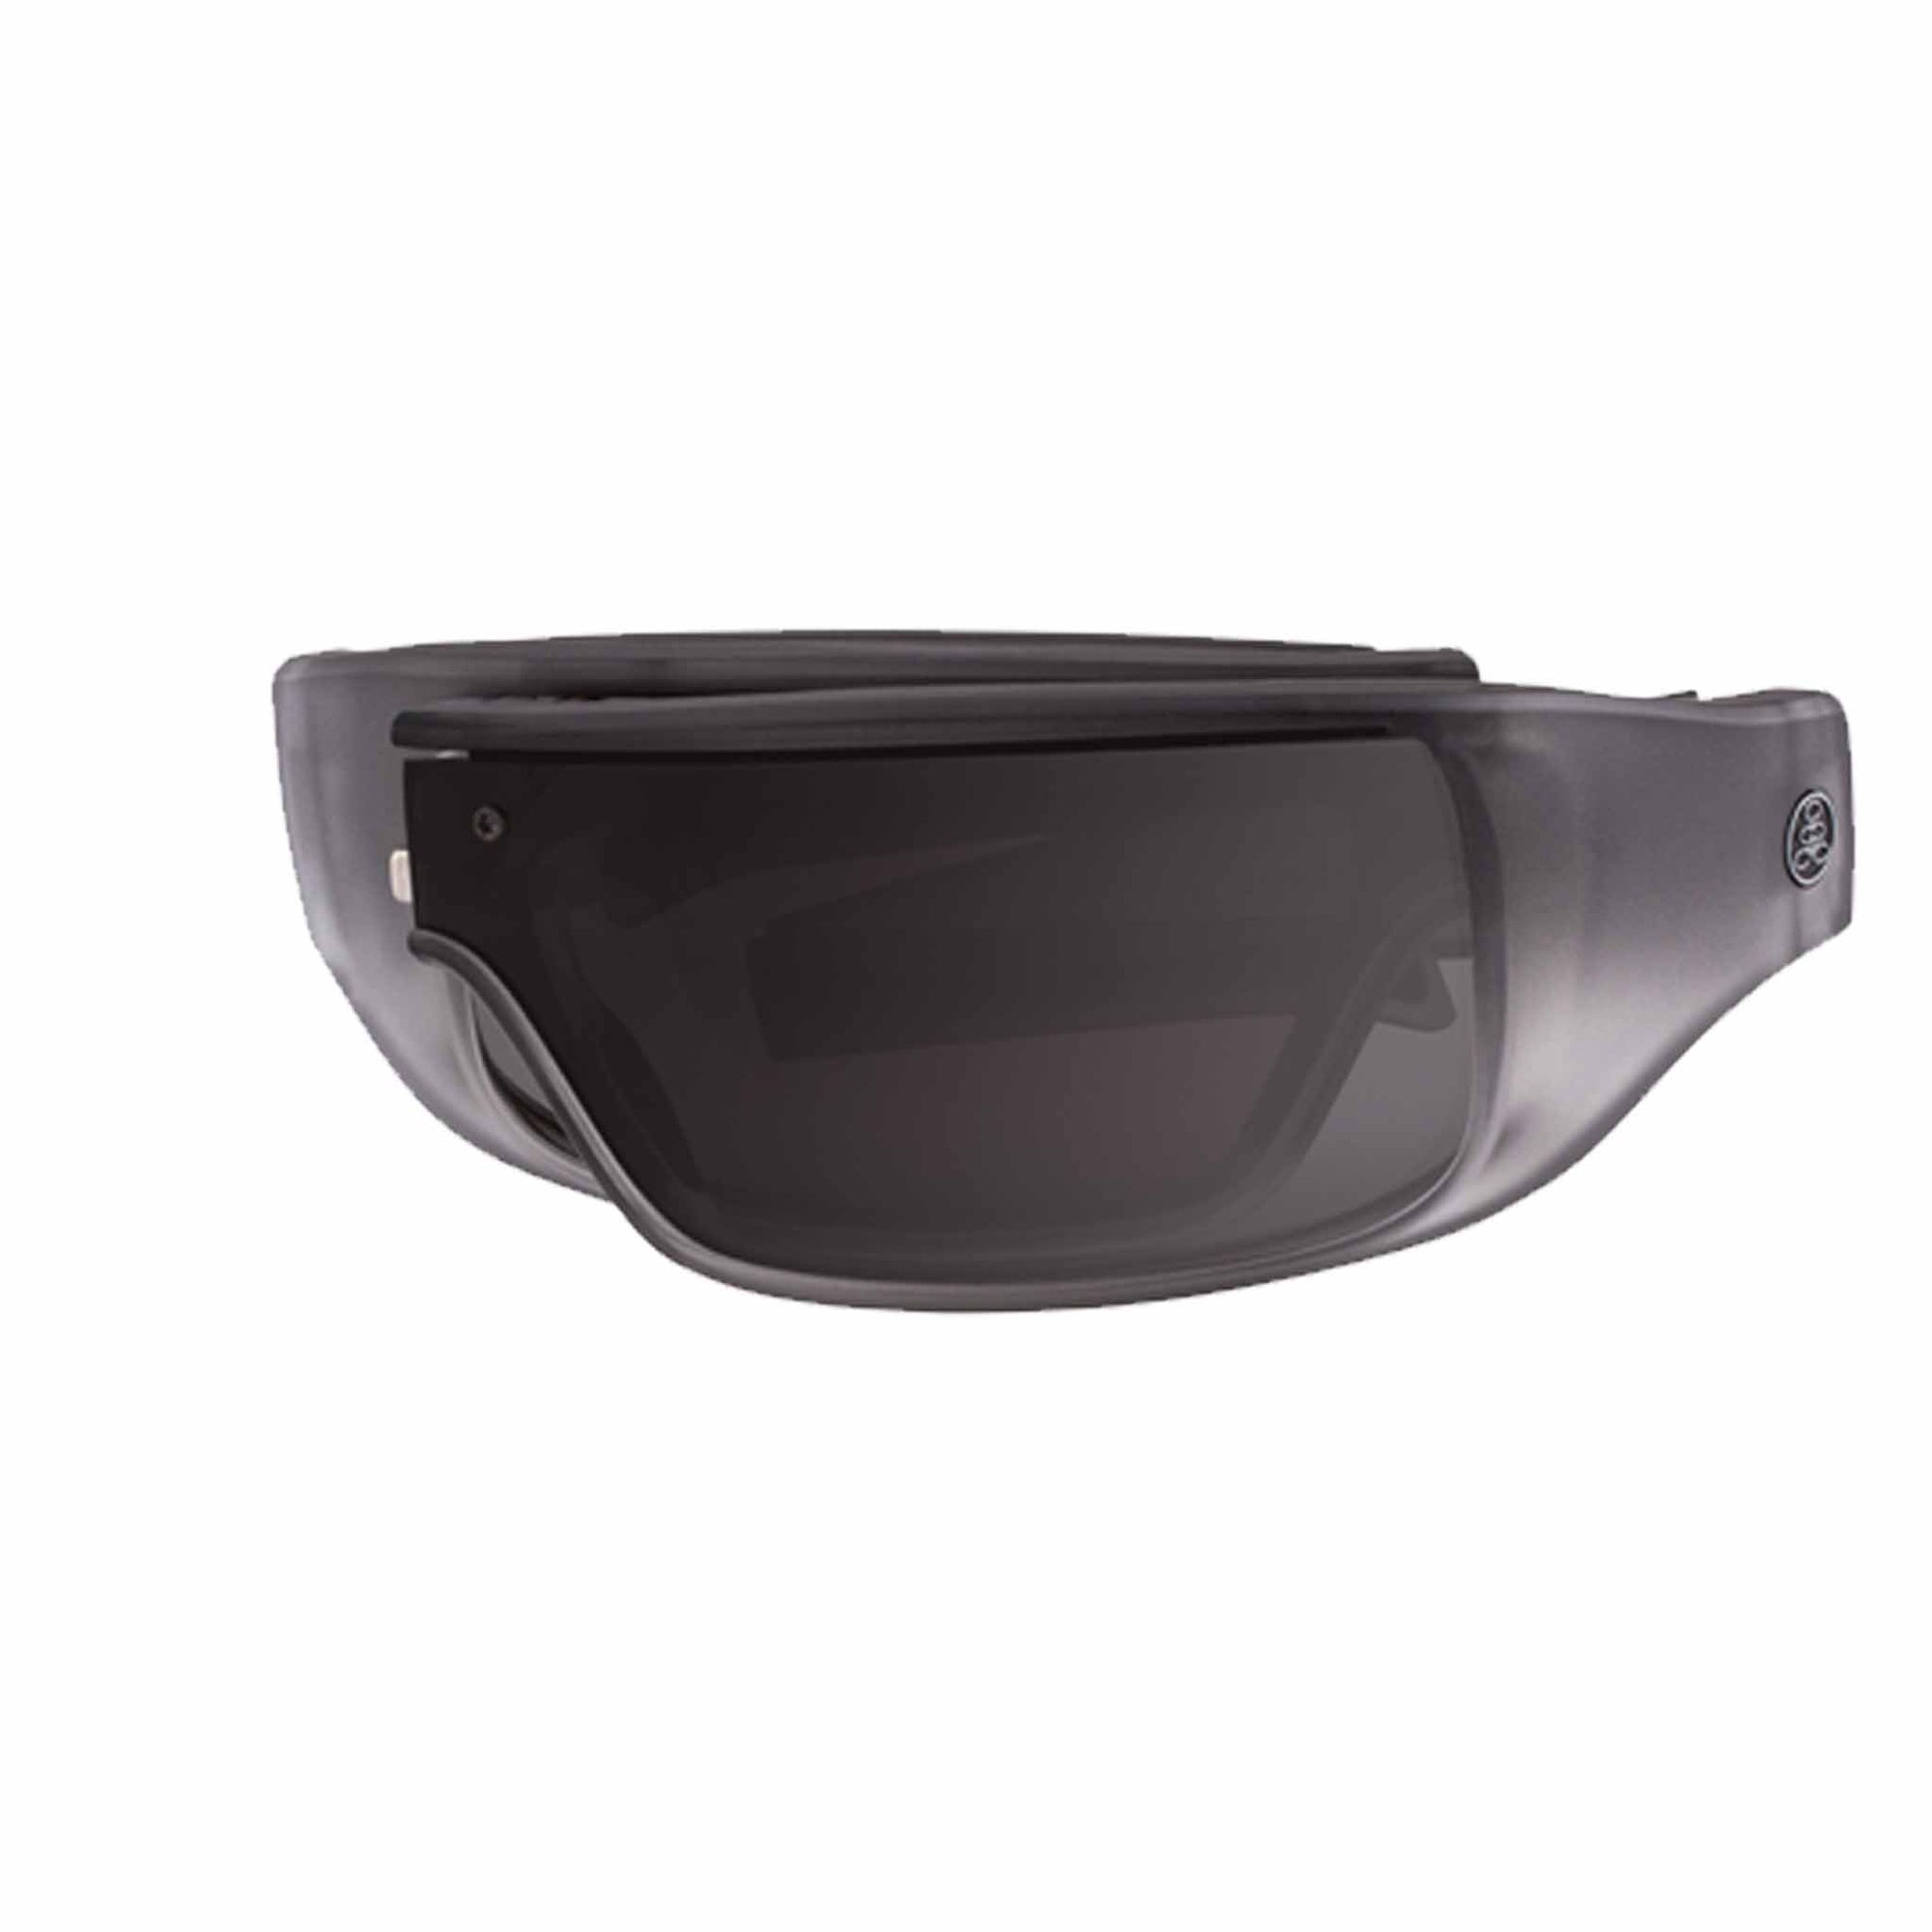 Matte smoke and clear crystal framed sunglasses with polarized gray lenses